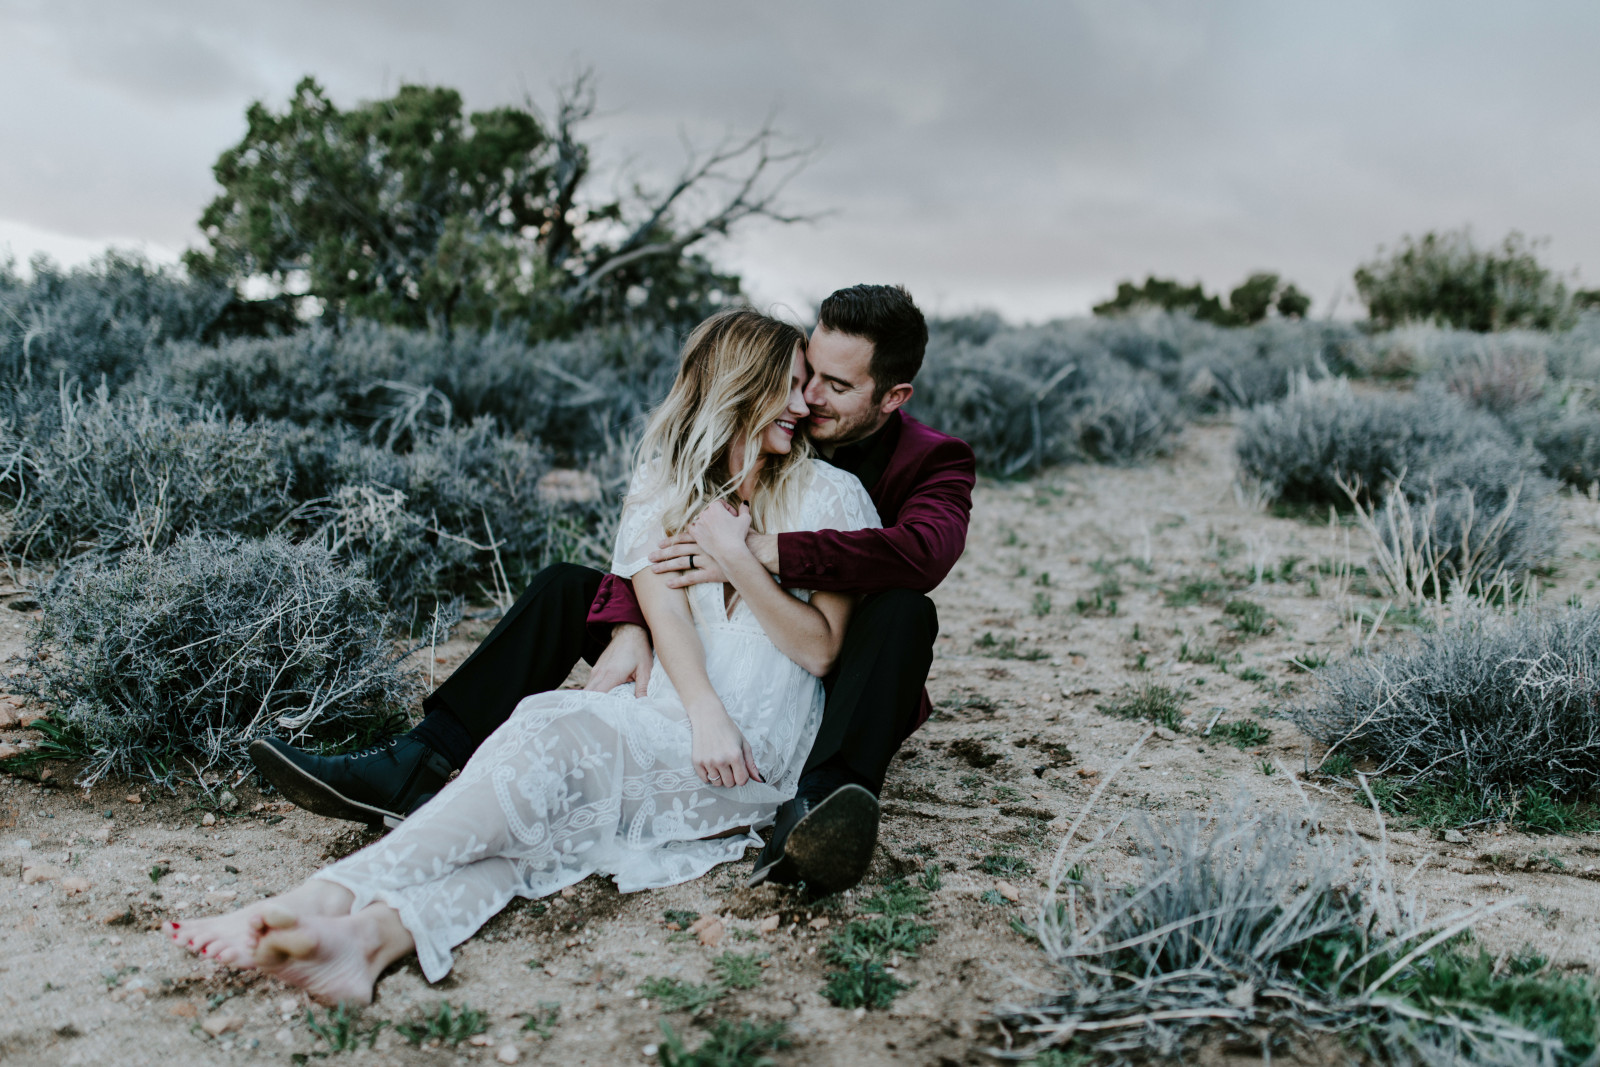 Alyssa and Jeremy sit on the sand at Joshua Tree. Elopement wedding photography at Joshua Tree National Park by Sienna Plus Josh.